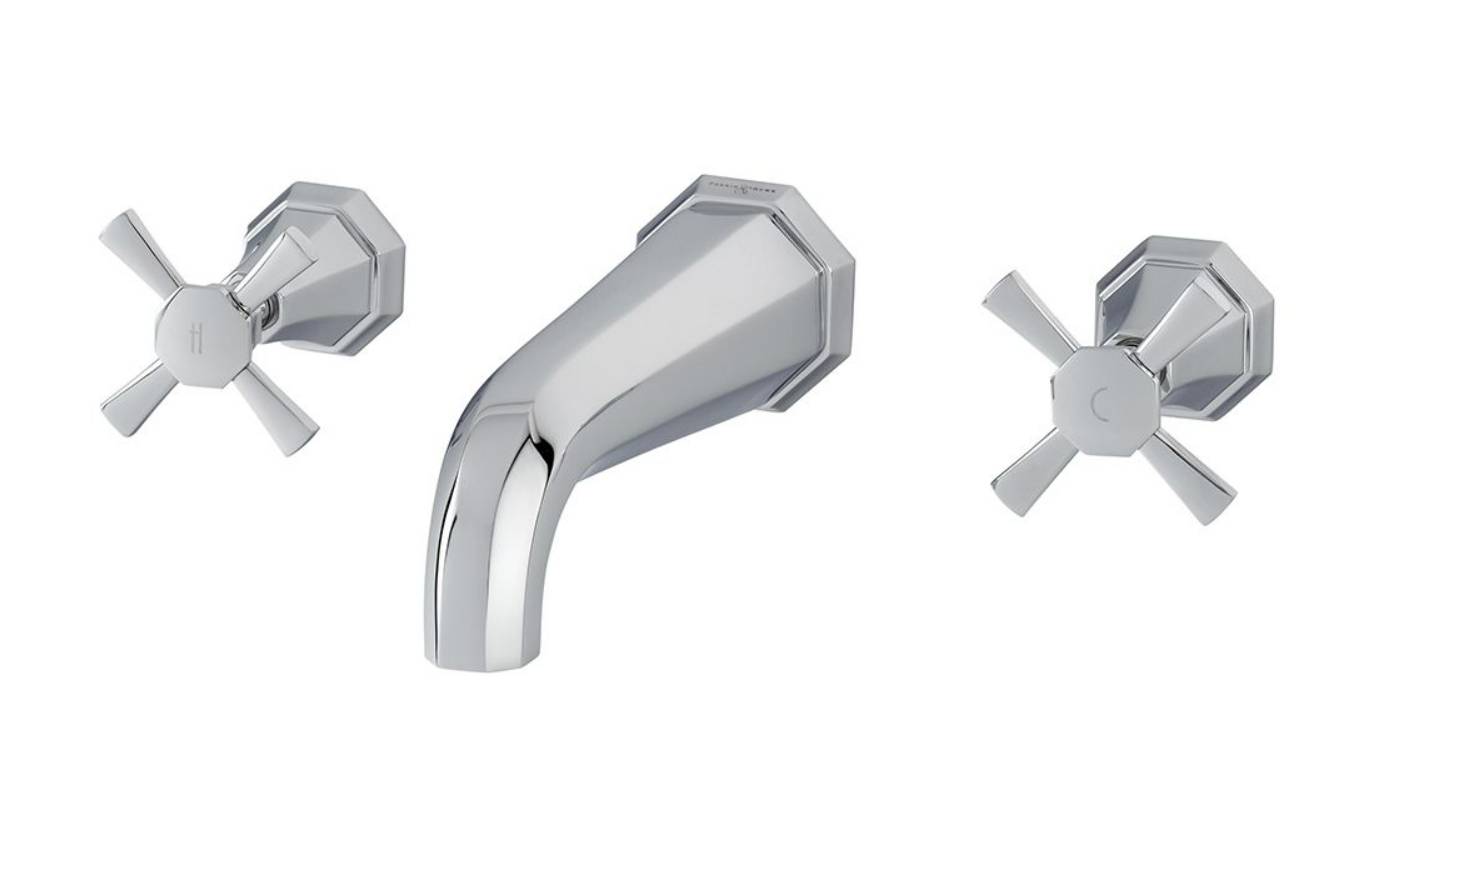 Deco Three-Hole Wall Or Deck Mounted Bath Filler With Lever Or Crosstop Handles - Bath filler tap